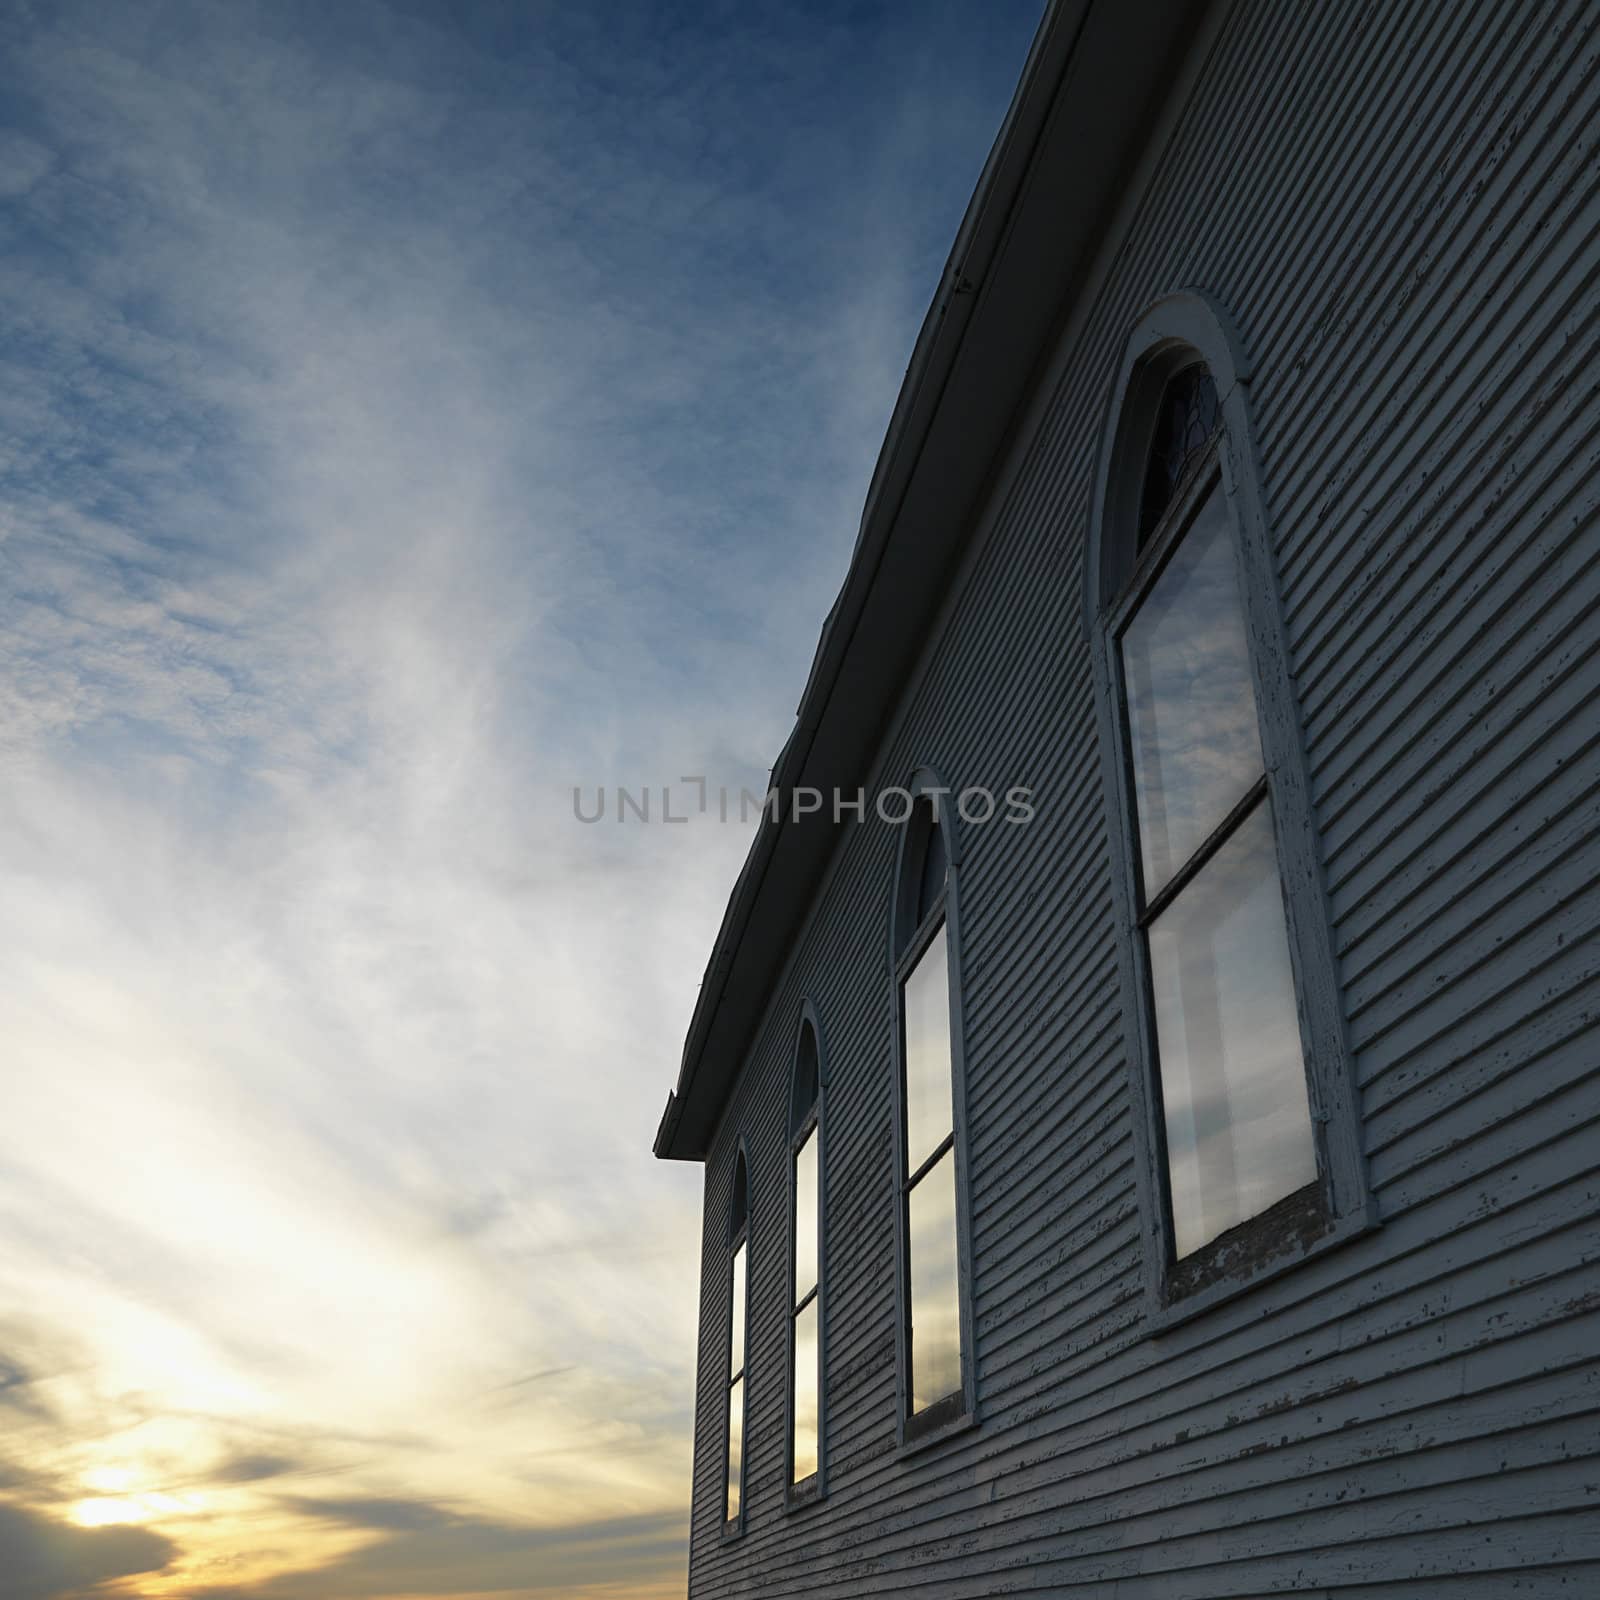 Sunset and clouds behind side view of building with arched windows and wooden siding.